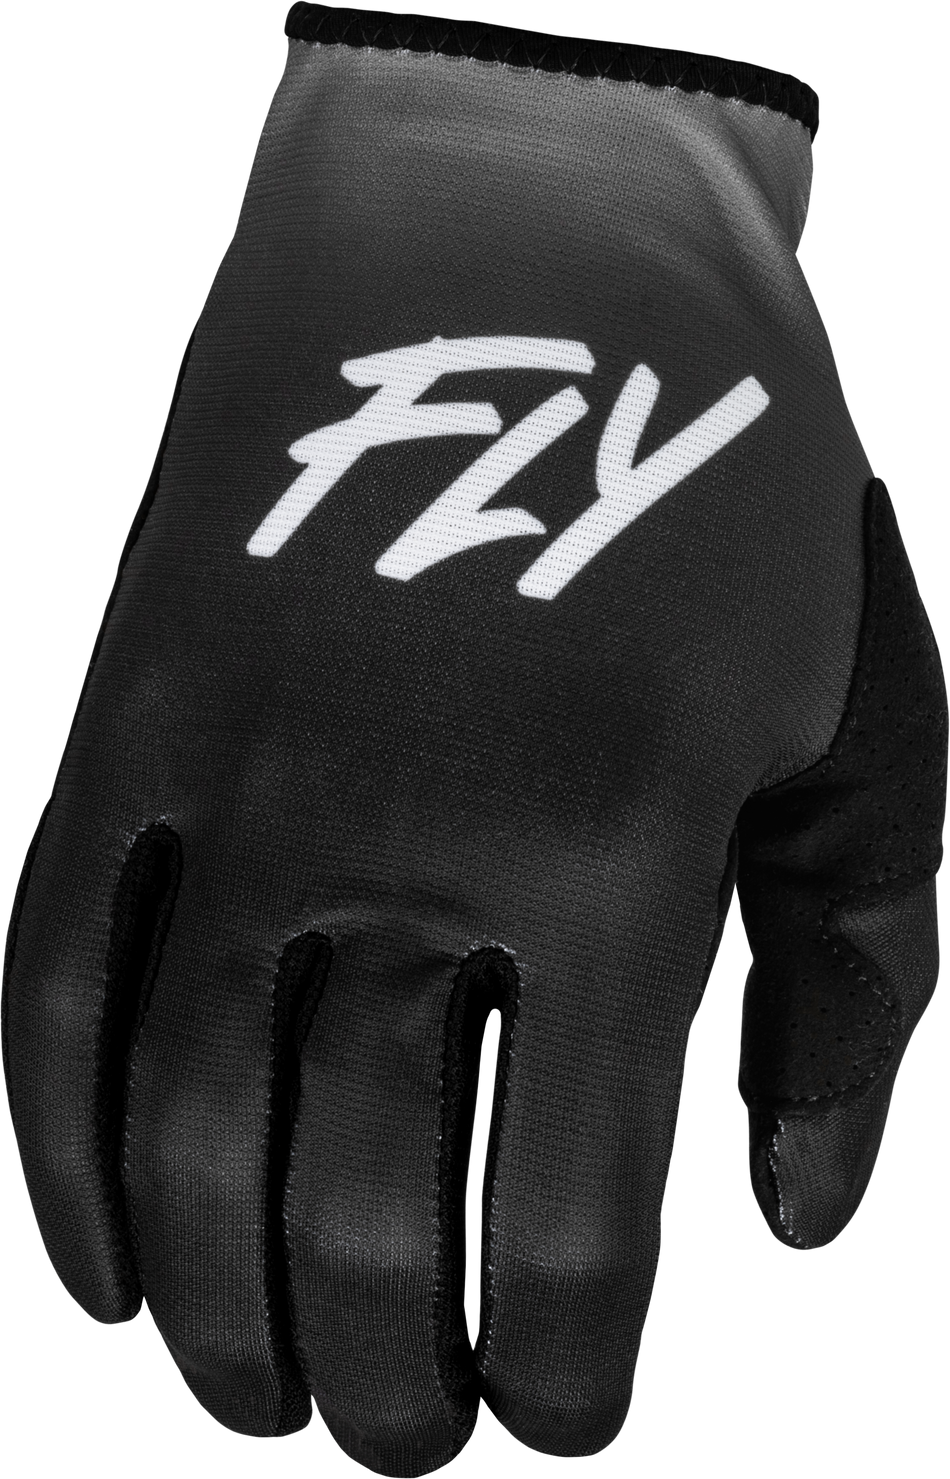 FLY RACING Youth Lite Gloves Grey/Black Yl 376-611YL